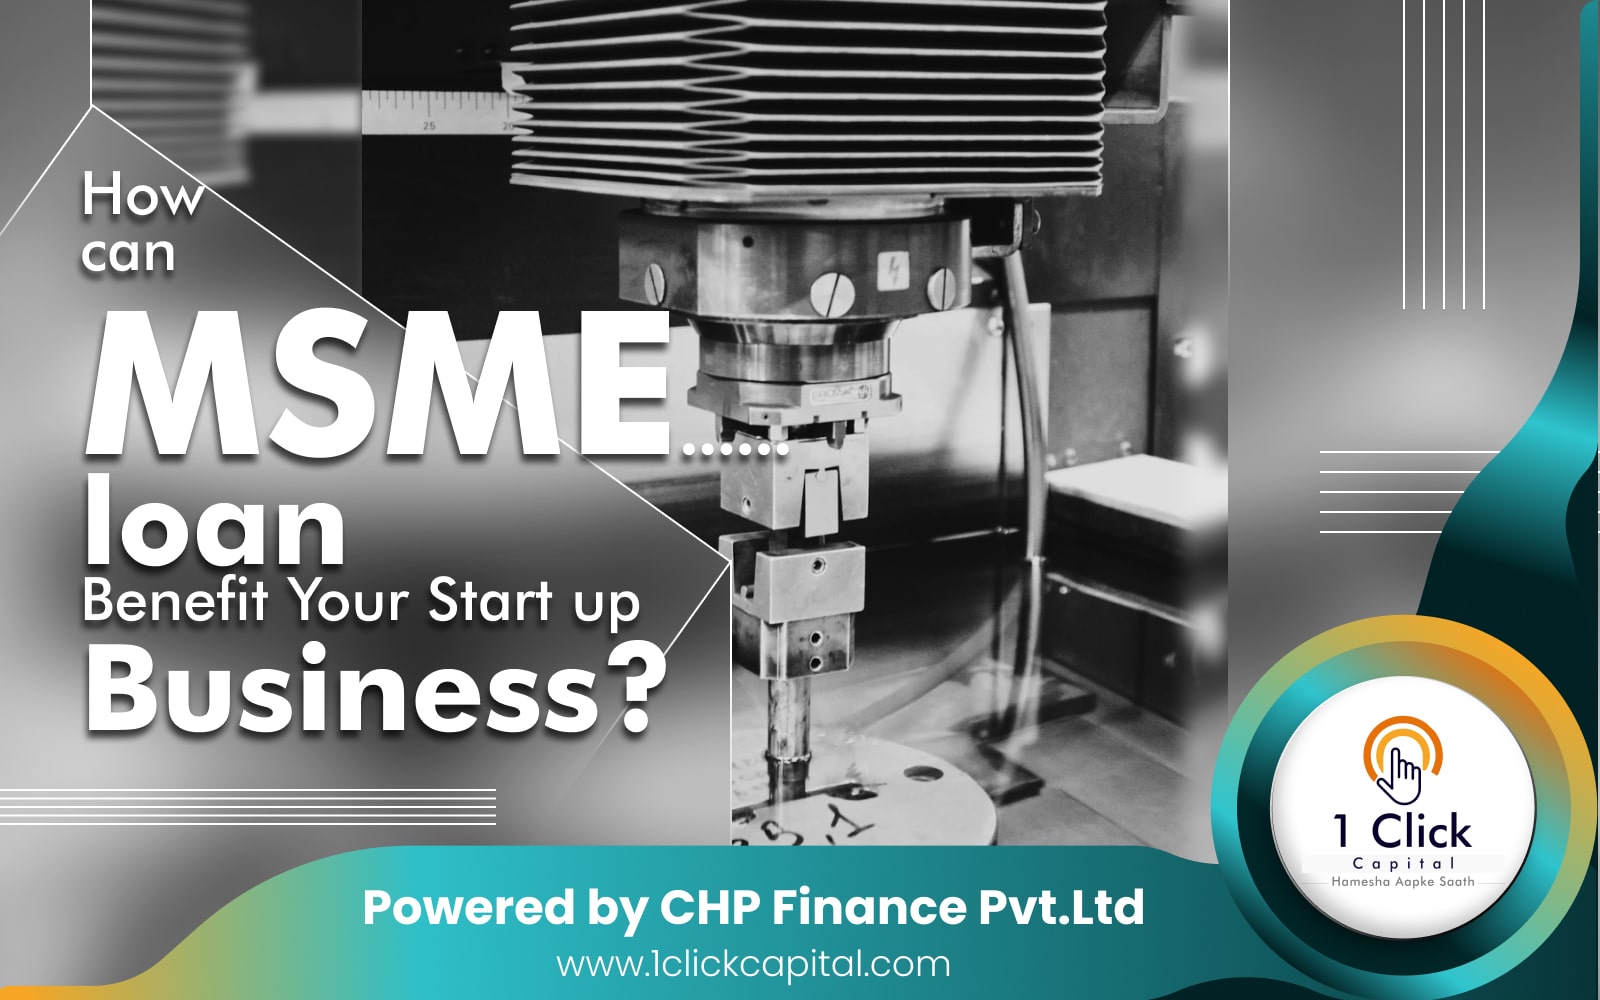 How can MSME loan Benefit Your Start up Business